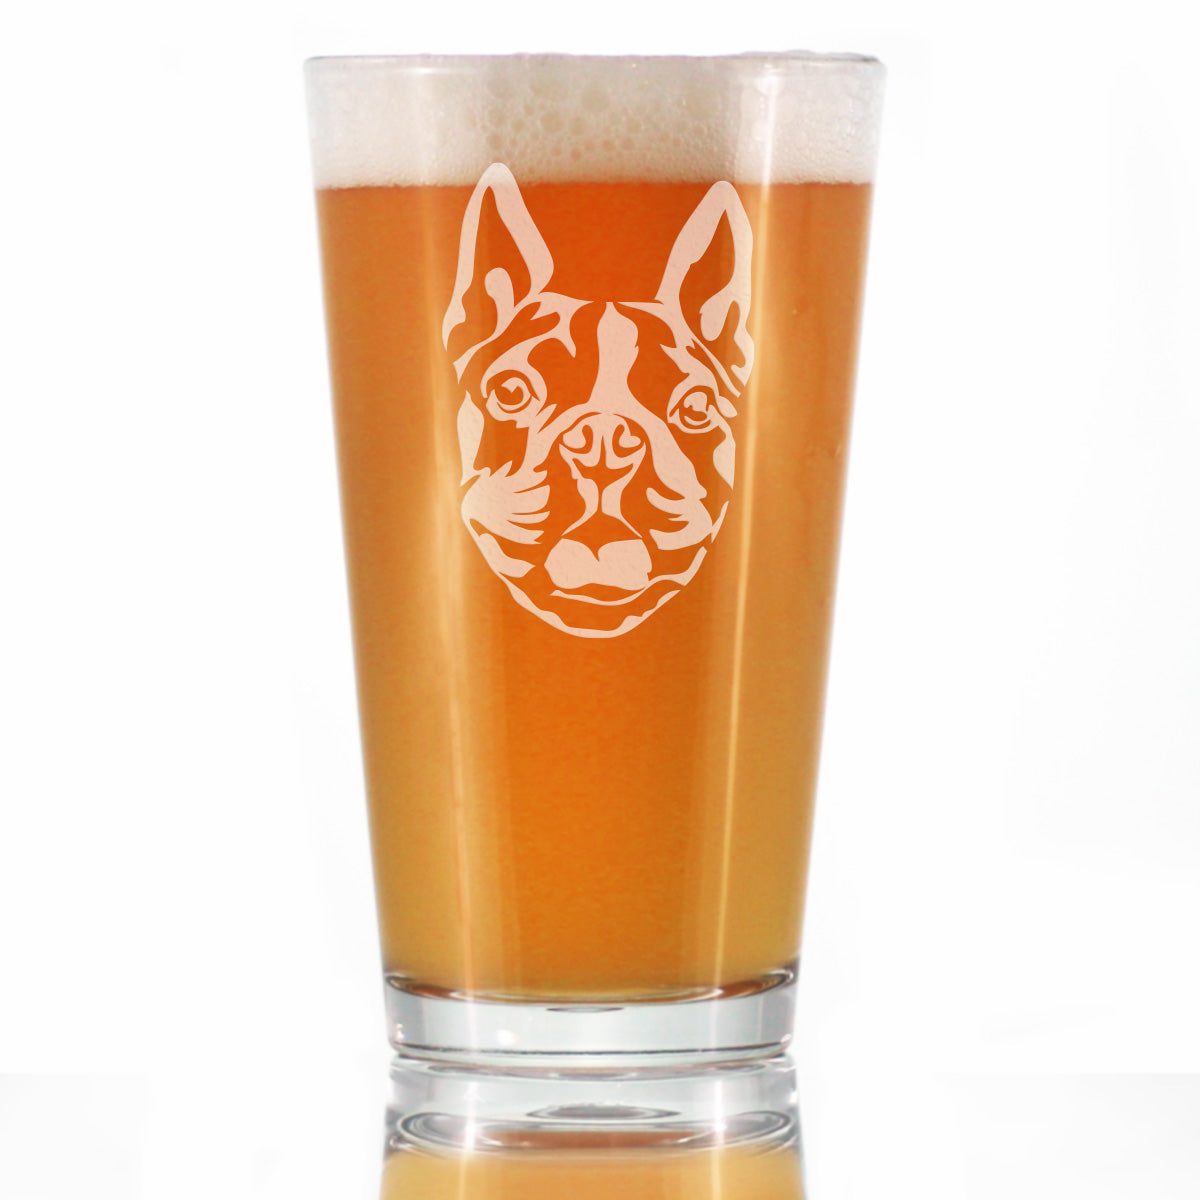 Boston Terrier Face Pint Glass for Beer - Unique Pet Themed Decor and Gifts for Moms &amp; Dads of Boston Terriers - 16 Oz